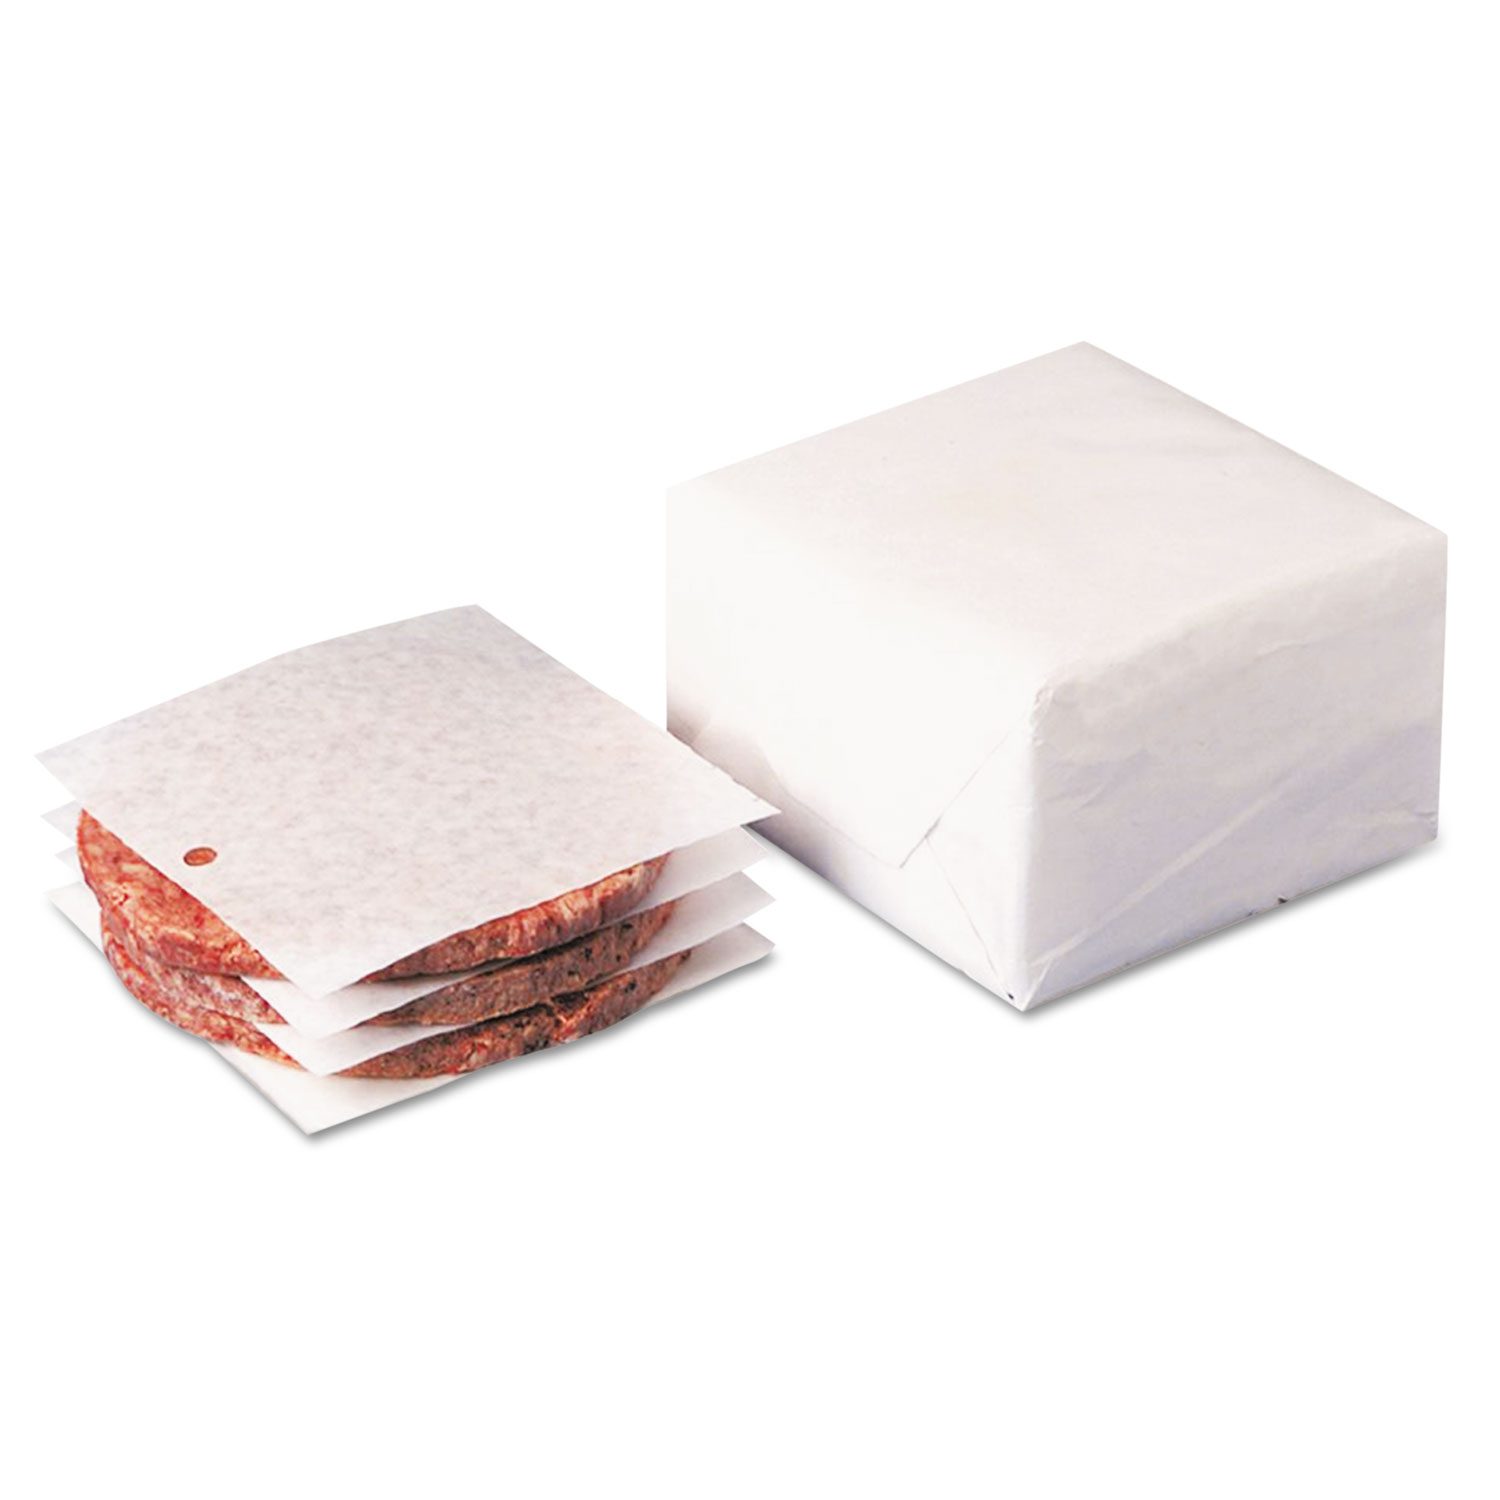 Dry Wax Laminated Patty Paper With Hole, White, 5 x 5